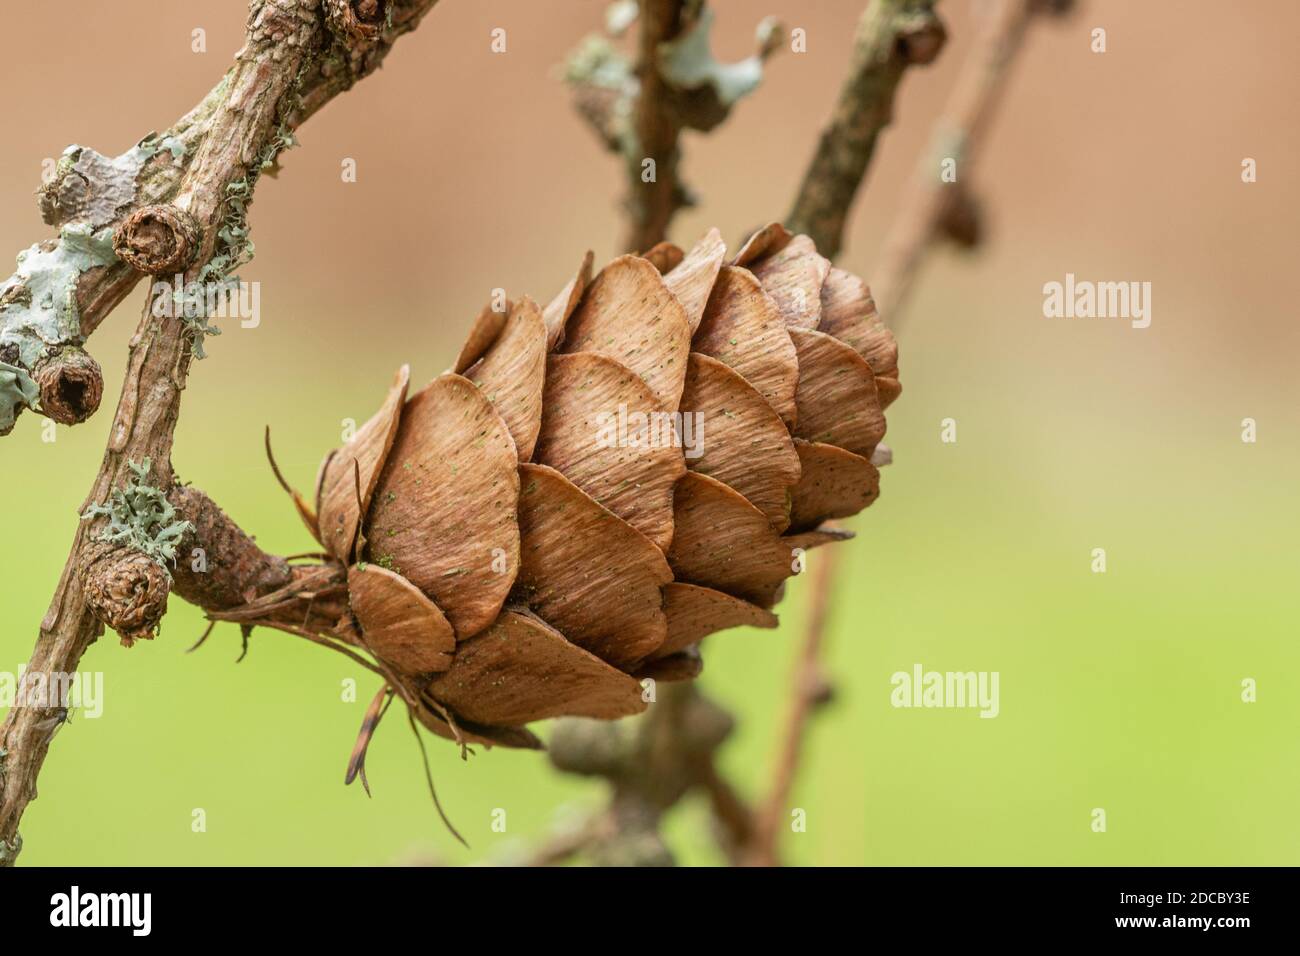 Larix x marschlinsii (Dunkeld Larch), close-up of a cone on the hardy deciduous conifer tree during autumn or november Stock Photo